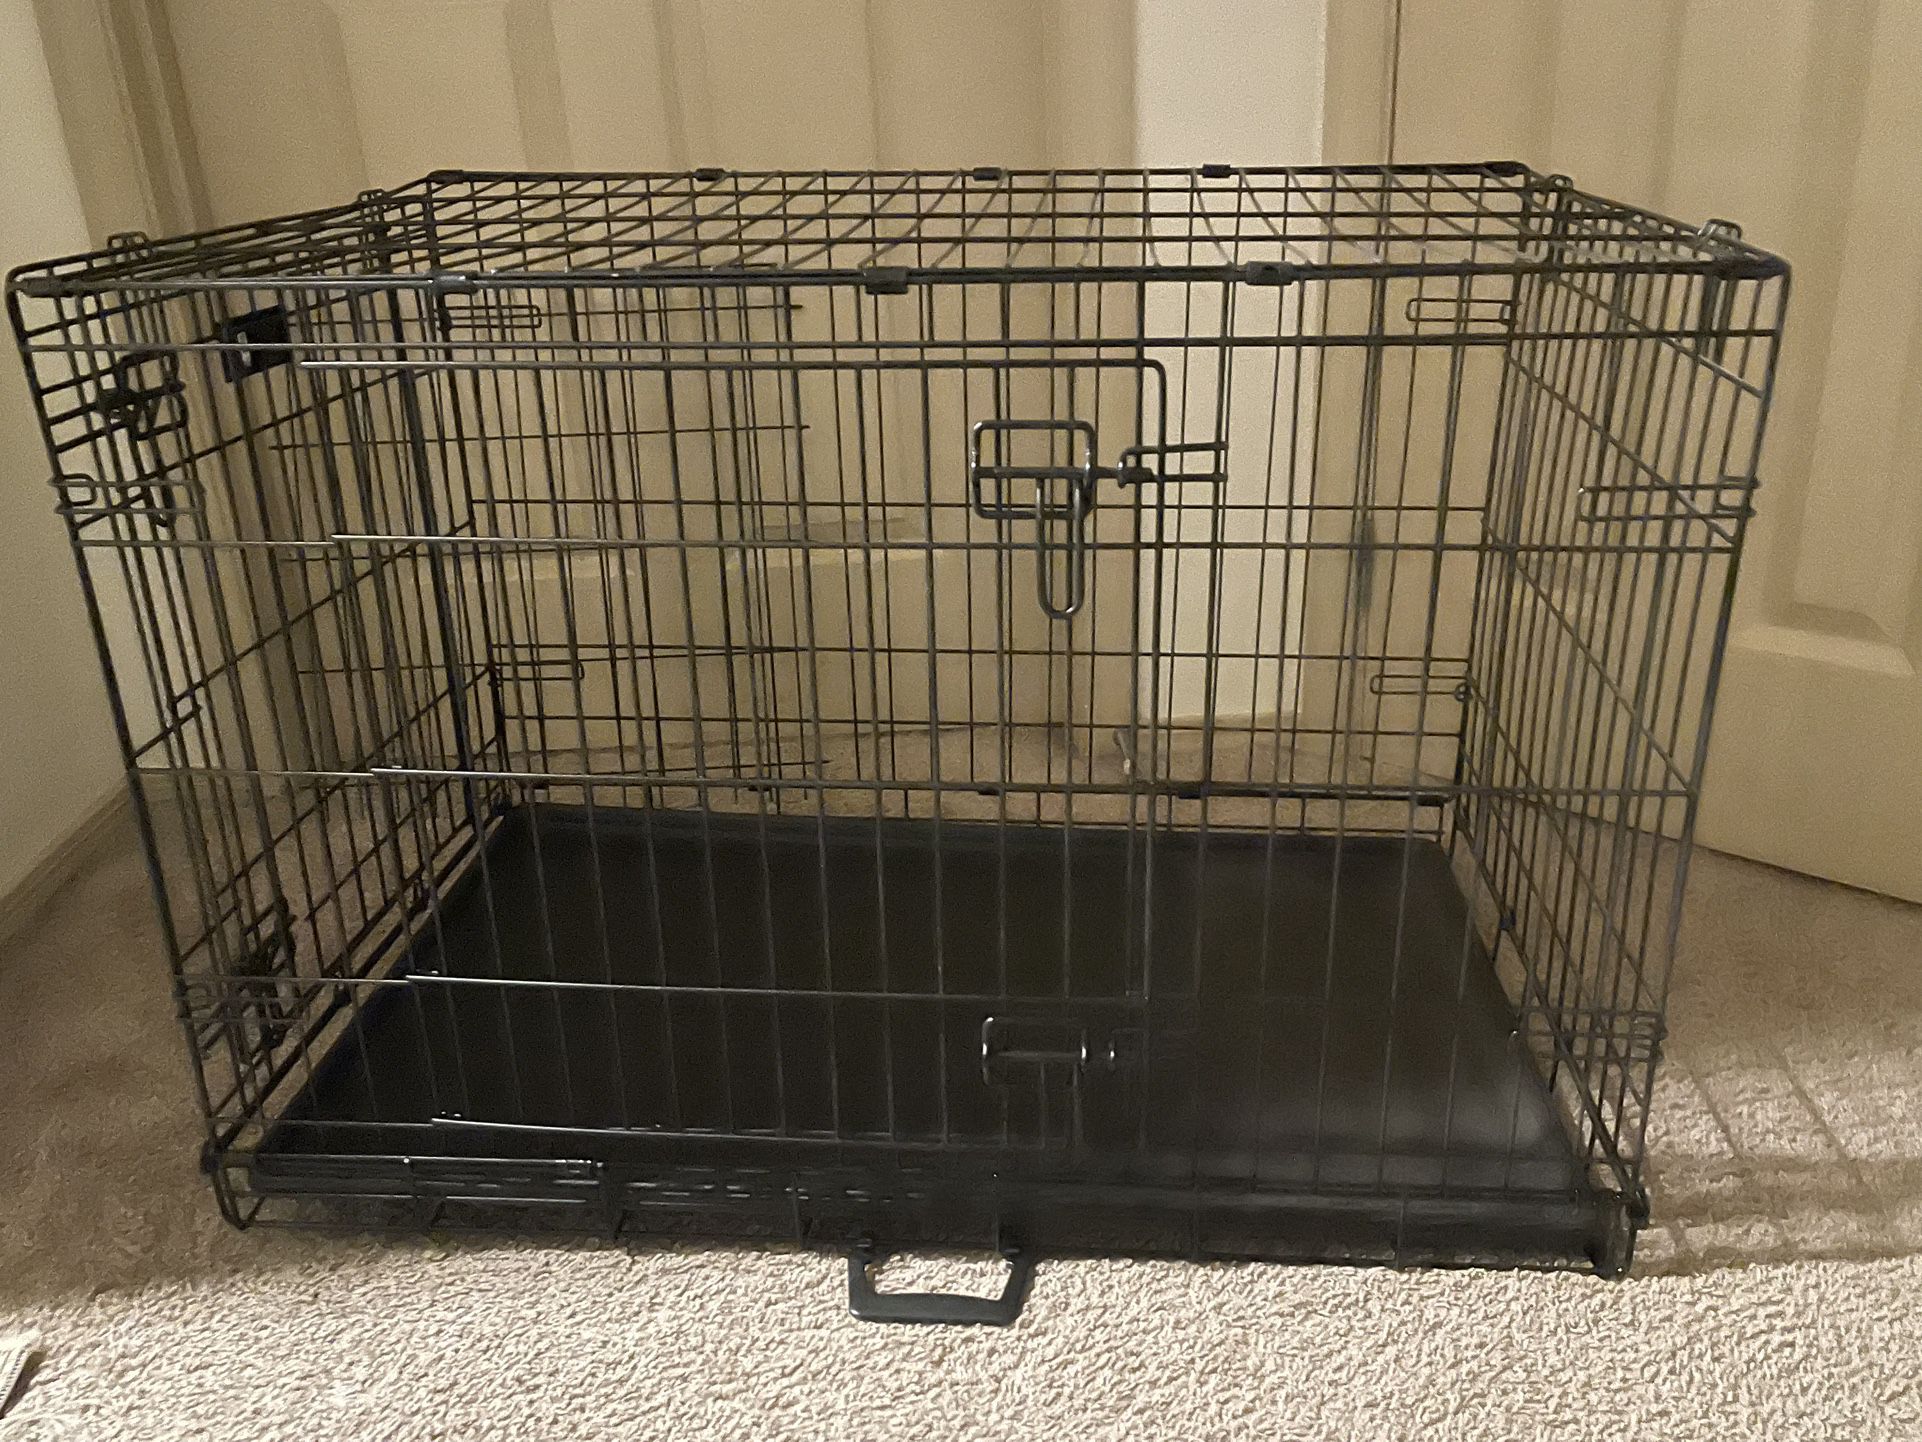 MidWest iCrate Fold & Carry Double Door Collapsible Wire Dog Crate (M/L)